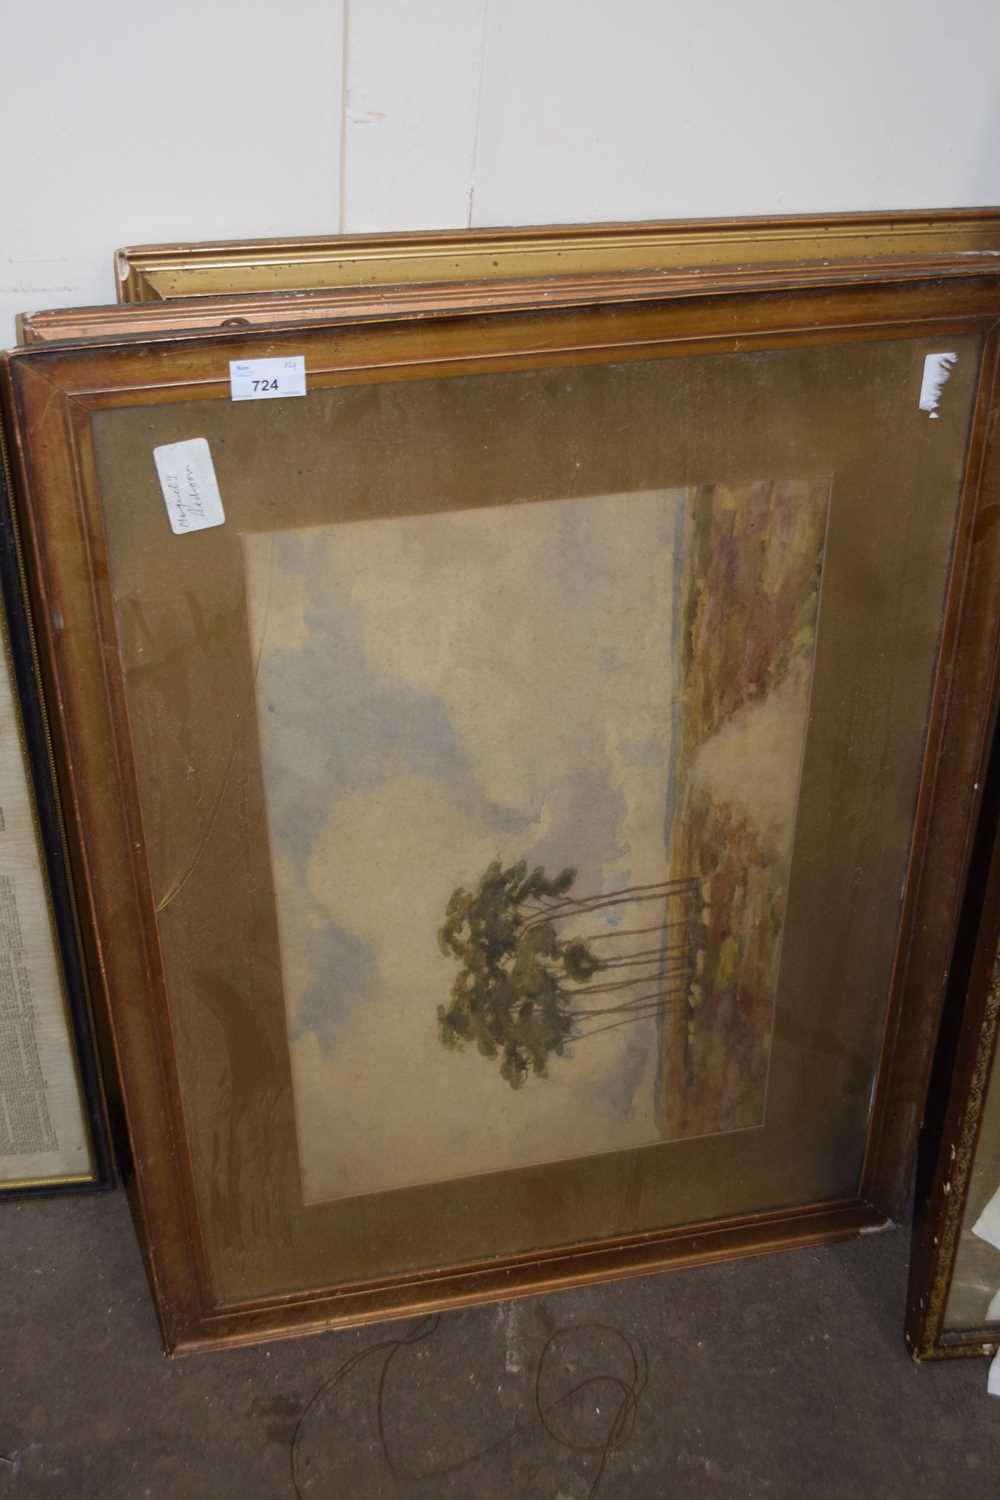 Group of four watercolours, various rural and harvest scenes, frames deteriorated